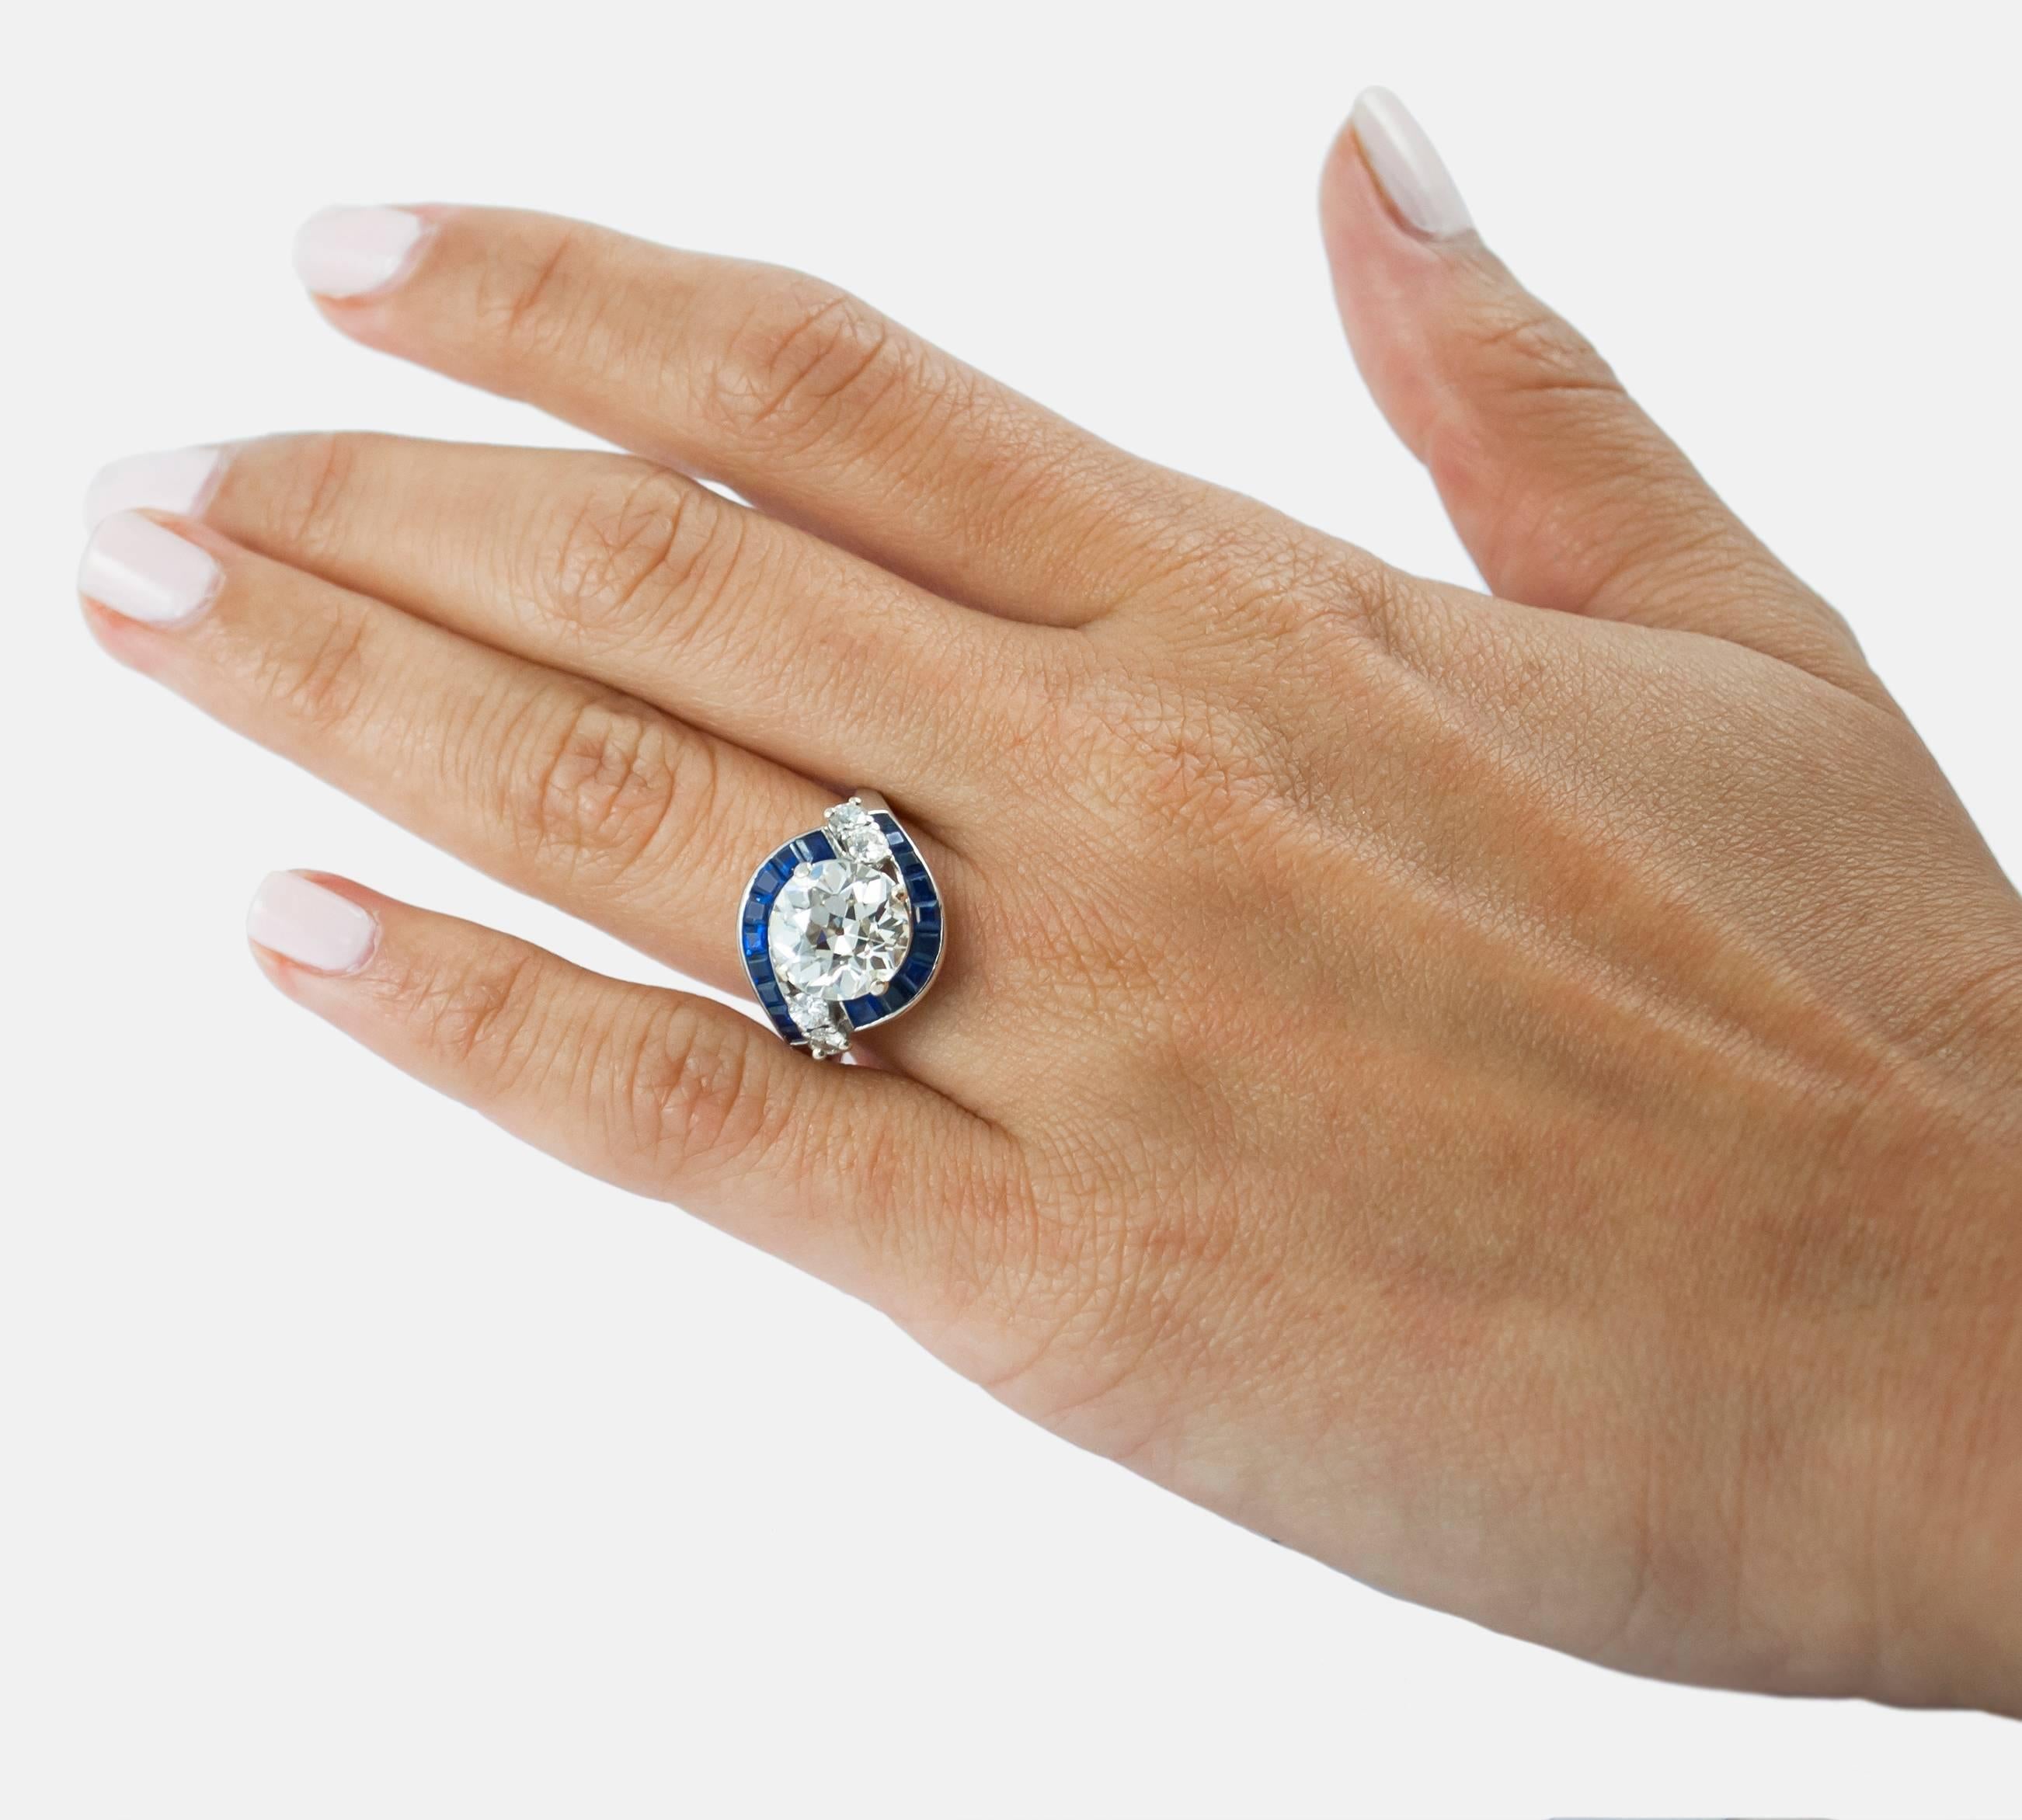 From deep in the vaults comes this 2.99ct Old European Cut diamond ring with sapphires surrounding the center stone. Truly pristine and one of a kind, this ring will be the envy of all your friends. 

This ring comes with a GIA cert stating the